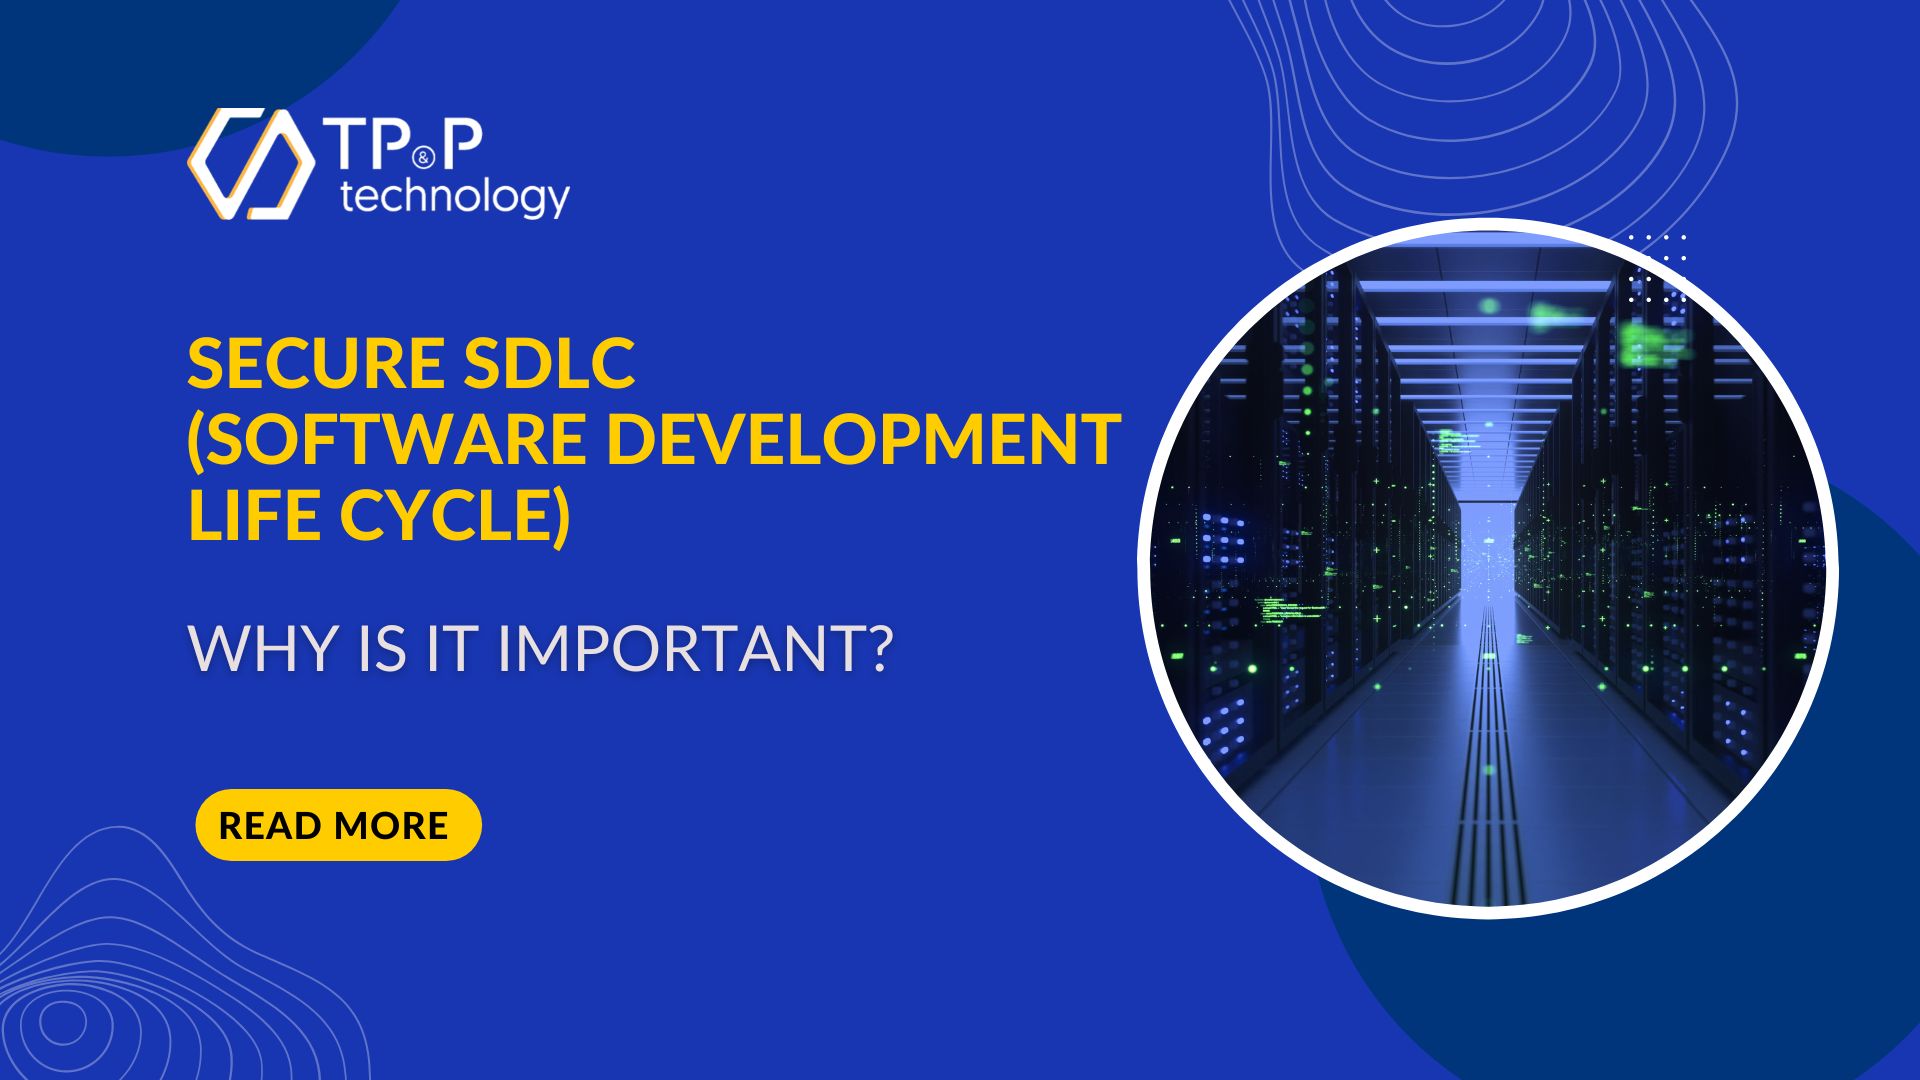 SECURE SDLC  (SOFTWARE DEVELOPMENT LIFE CYCLE): WHY IS IT IMPORTANT?